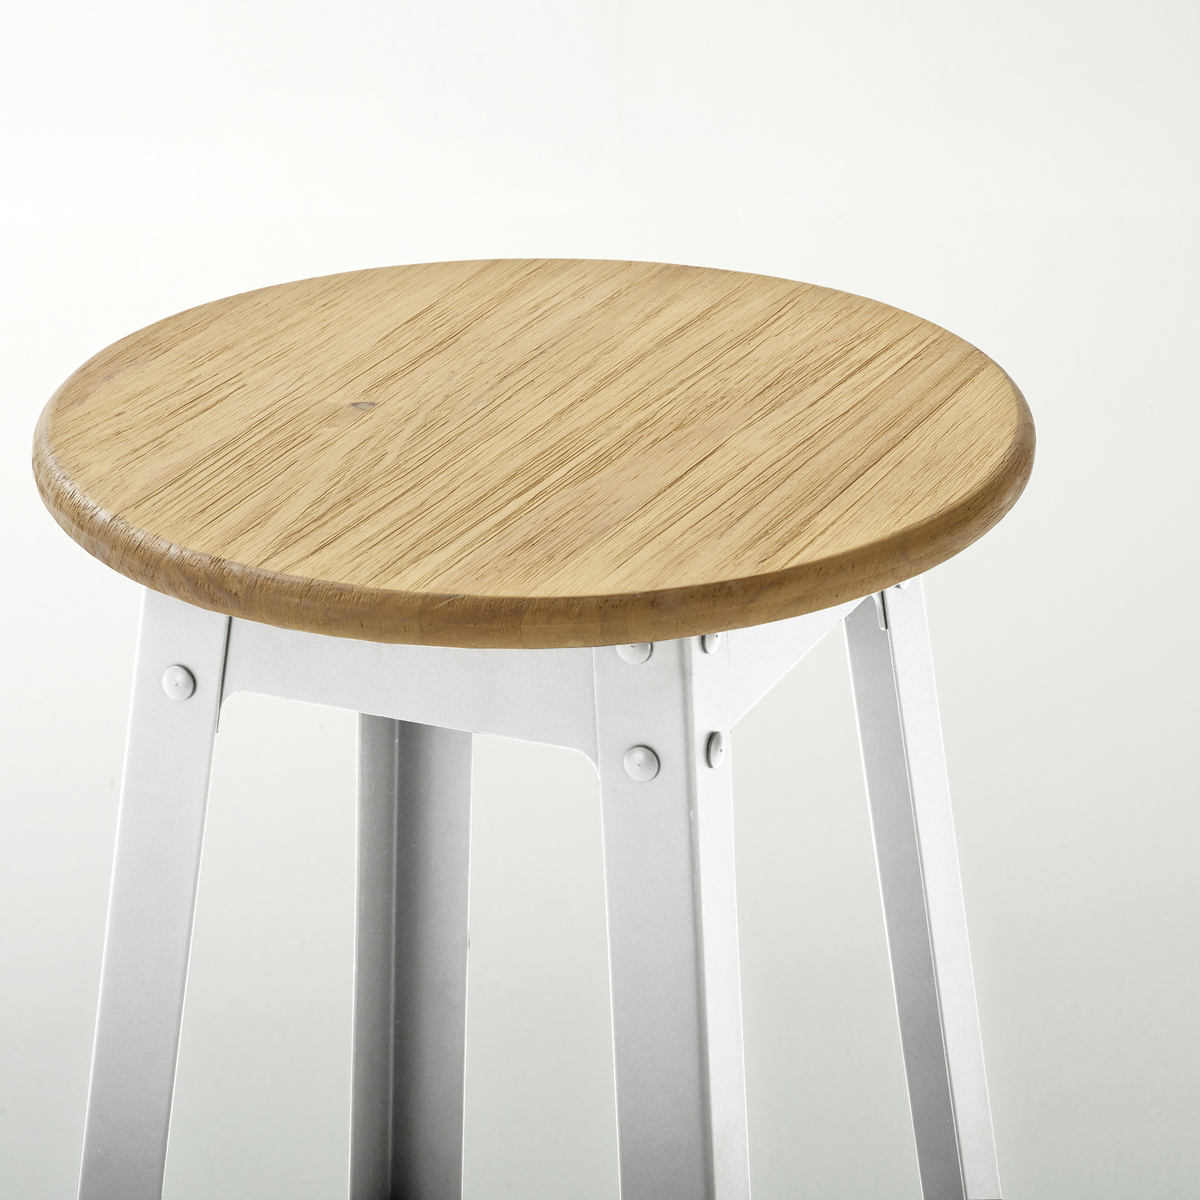 Product photograph of Hiba 75cm High Industrial-style Stool from La Redoute UK.